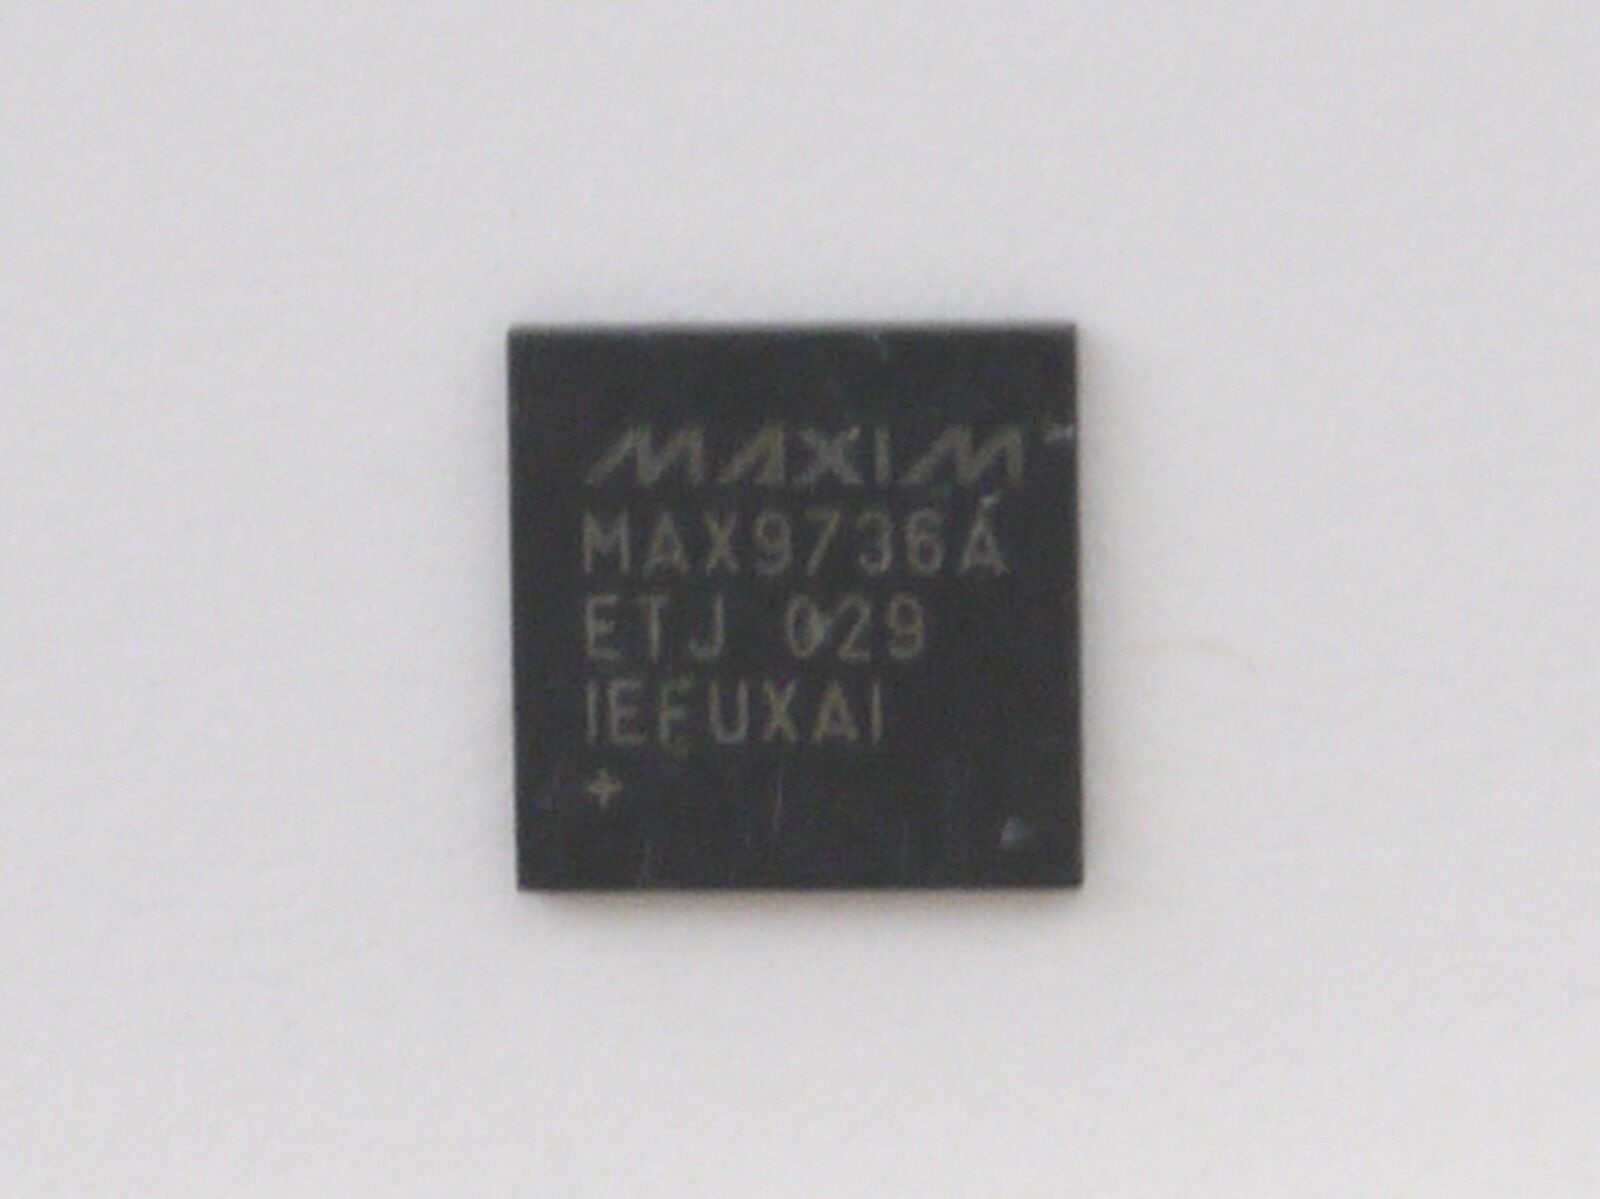 5 Pcs  Max9736a Qfn 32in Power Ic Chip Chipset